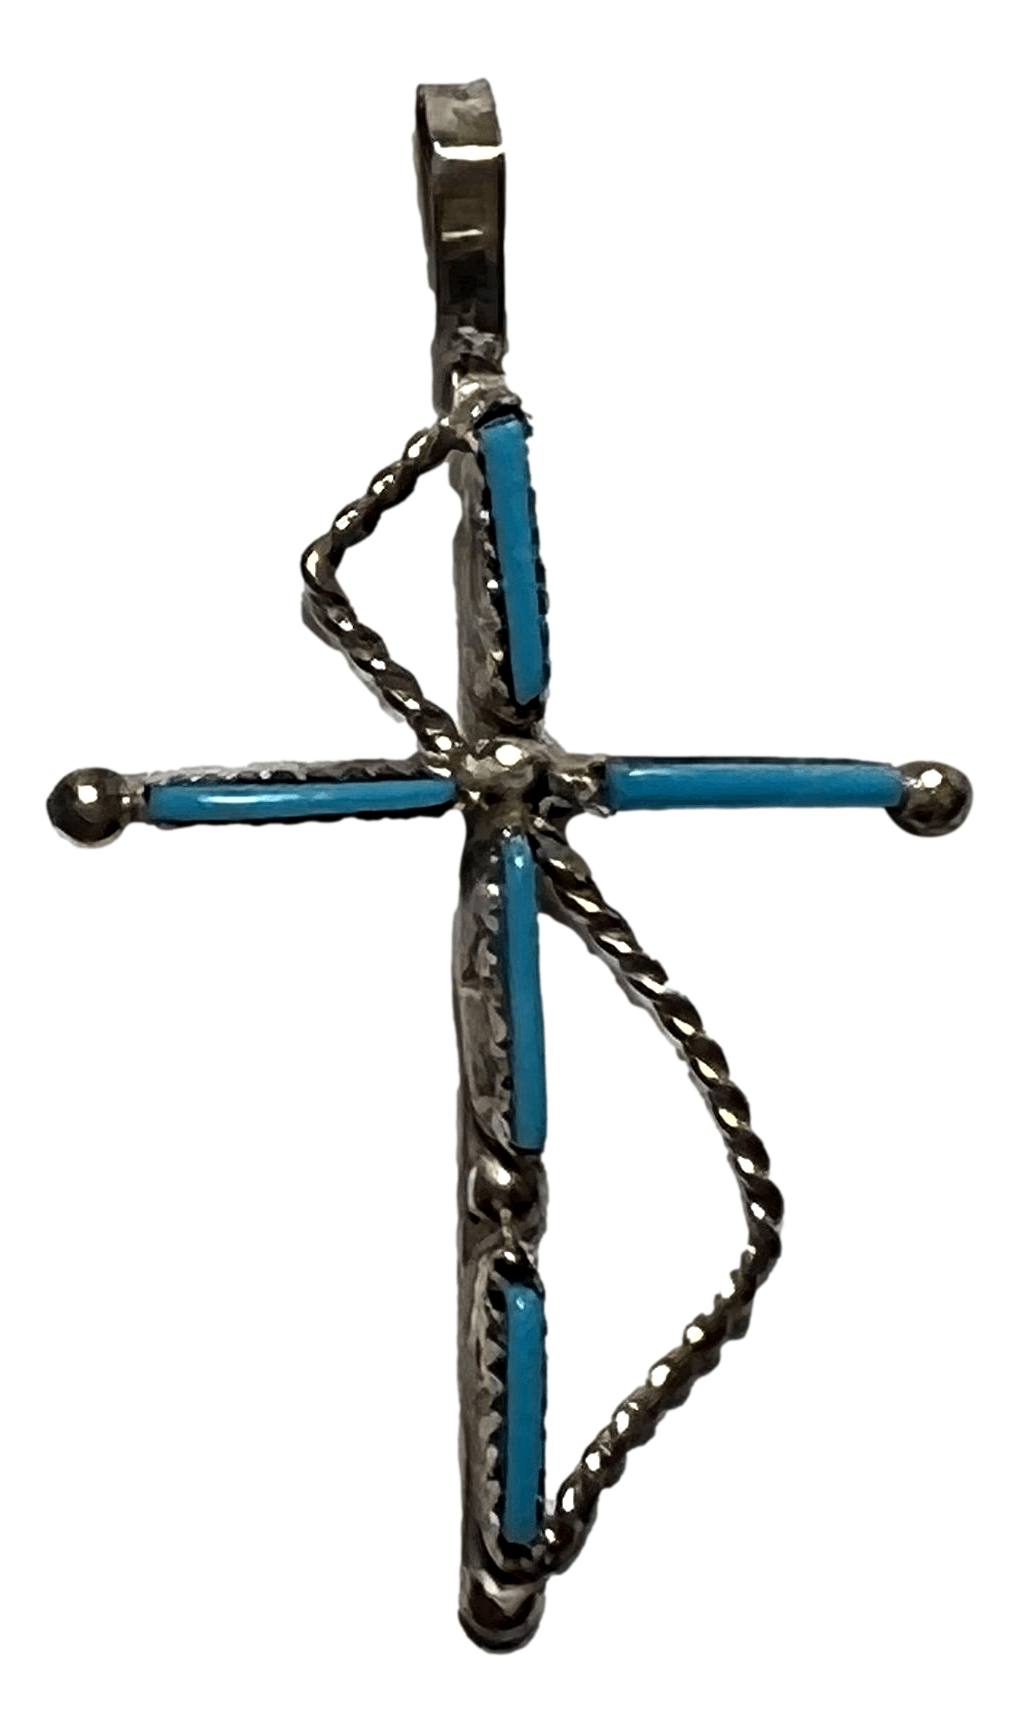 Pendant Cross Sterling Silver 1.25 H inches Needlepoint Turquoise Stone Handcrafted By Native American Artisans Stamped - Ysleta Mission Gift Shop- VOTED El Paso's Best Gift Shop